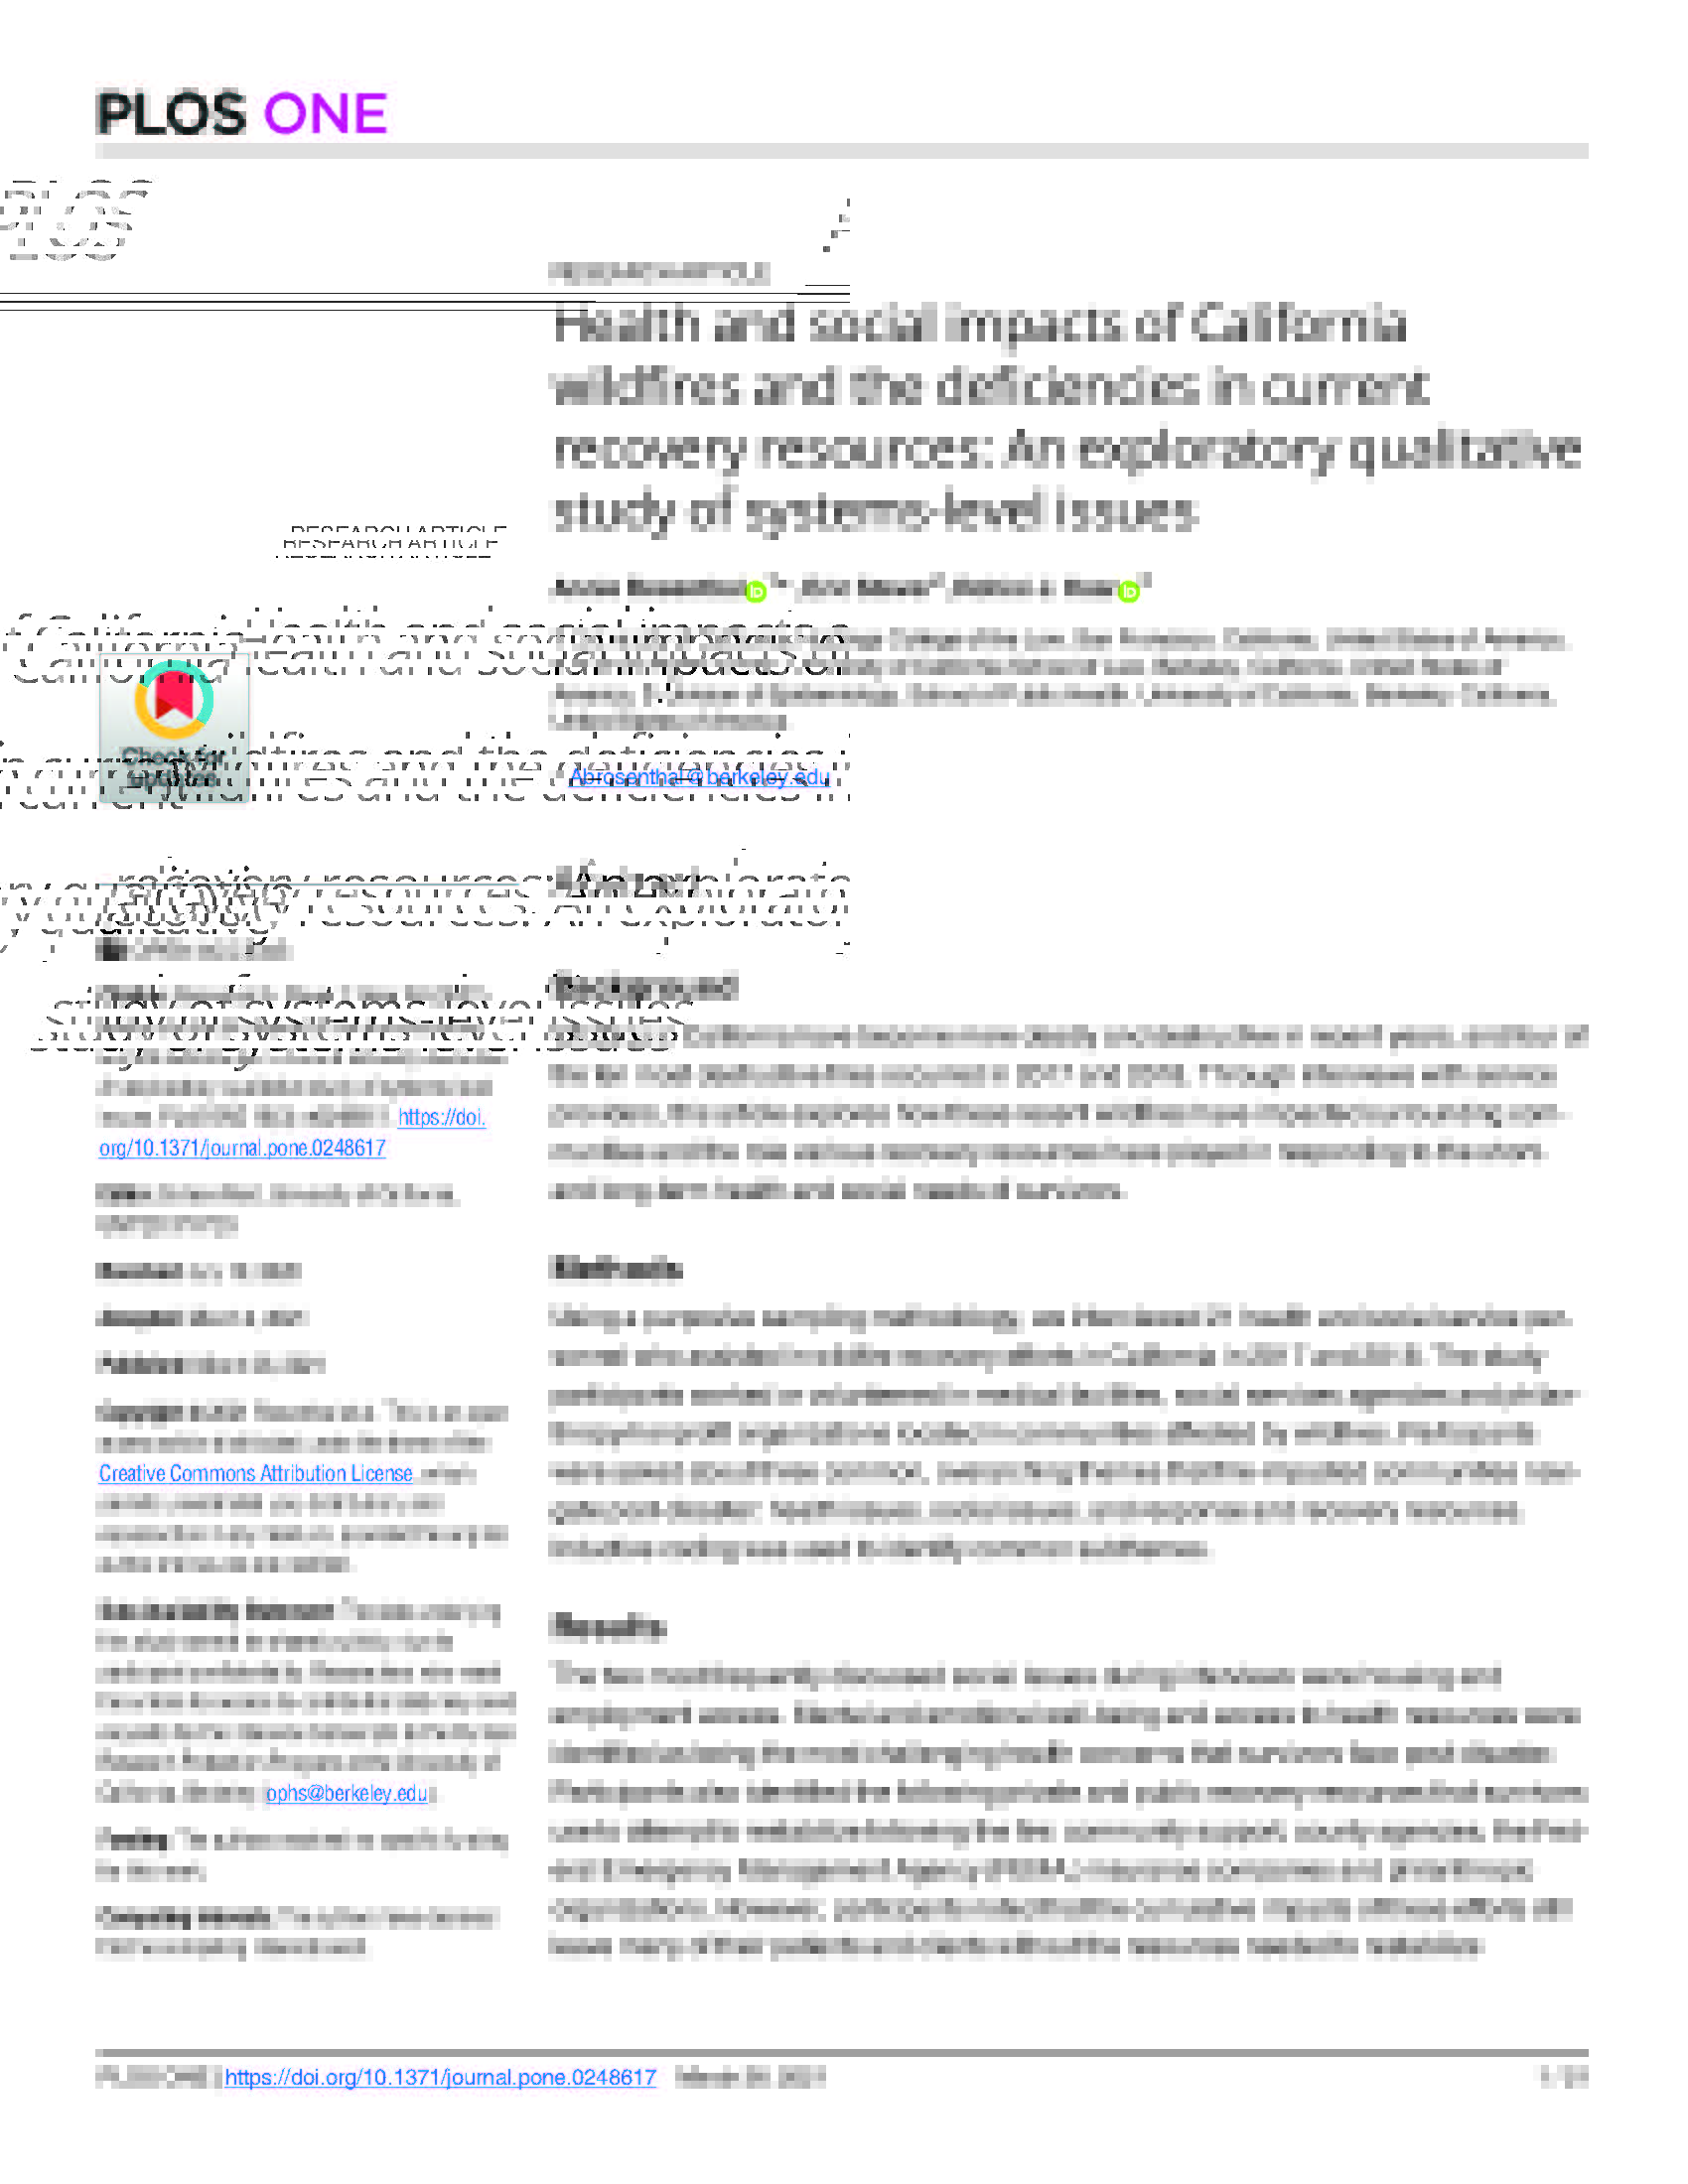 Health and social impacts of California wildfires and the deficiencies in current recovery resources: An exploratory qualitative study of systems-level issues